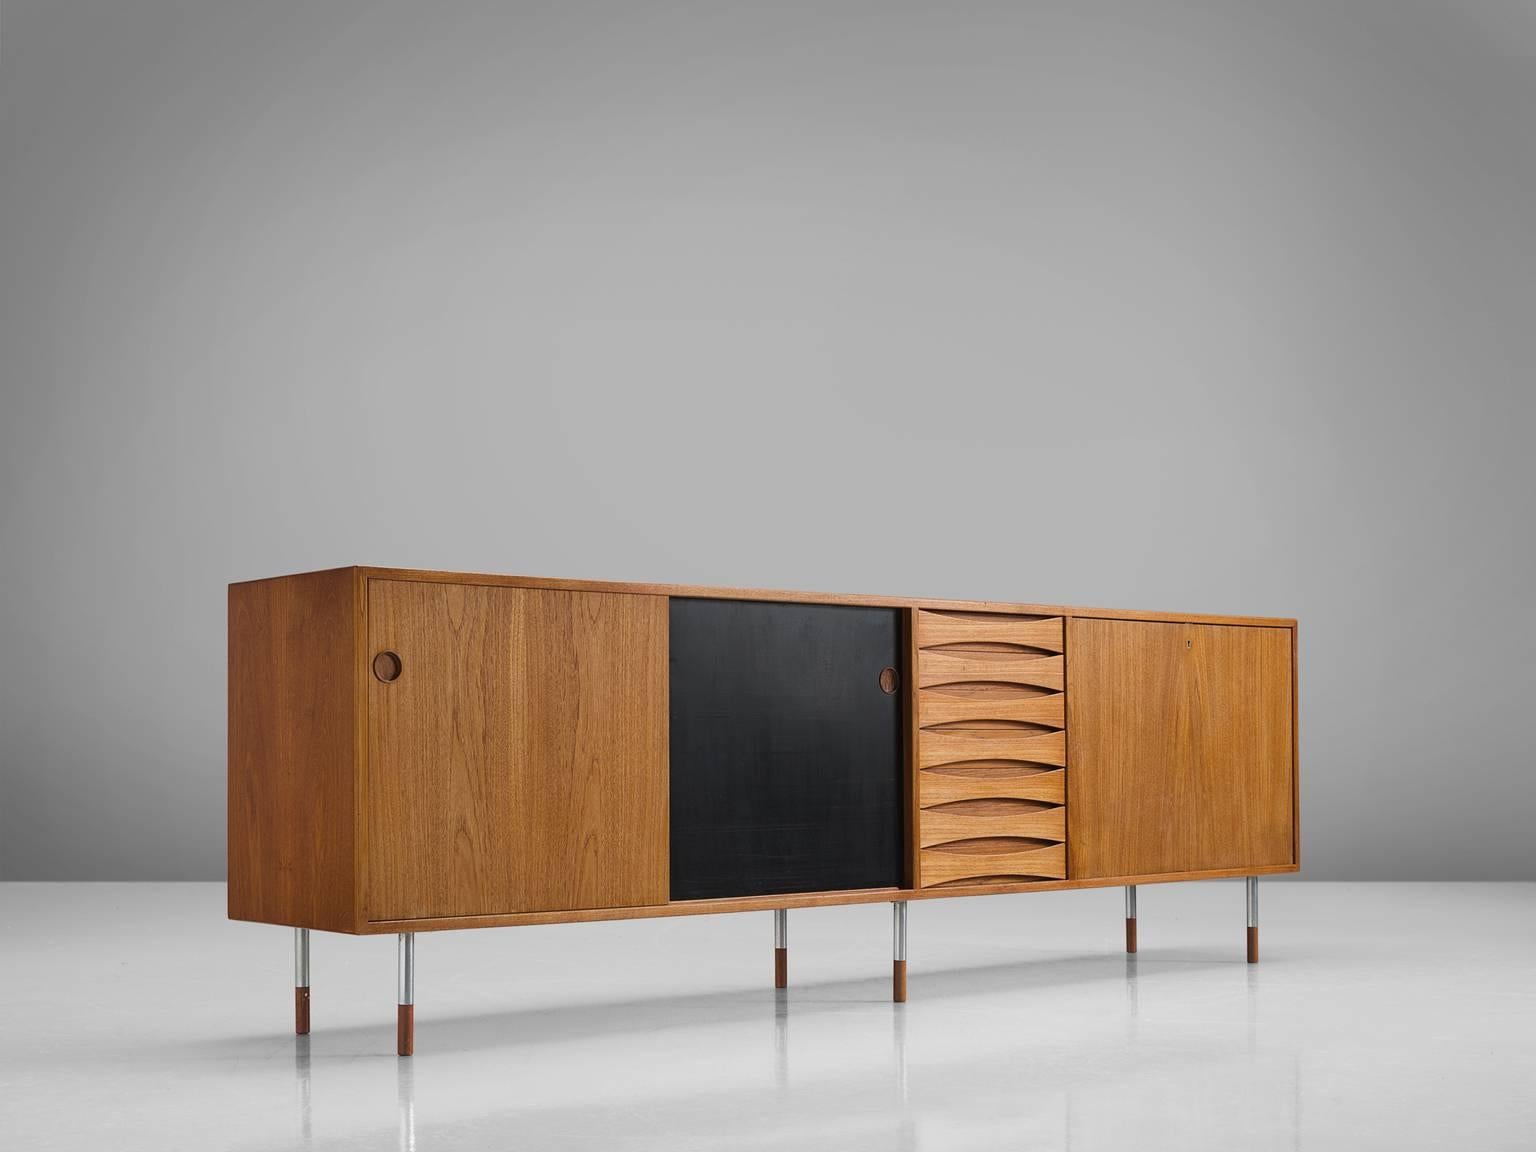 Arne Vodder for P. Olsen Sibast Møbler, Credenza model 29A, in teak and metal, by Denmark, 1959.

This iconic sideboard in teak by Danish designer Arne Vodder is part of the midcentury collection. The typical refined Vodder details can be found on